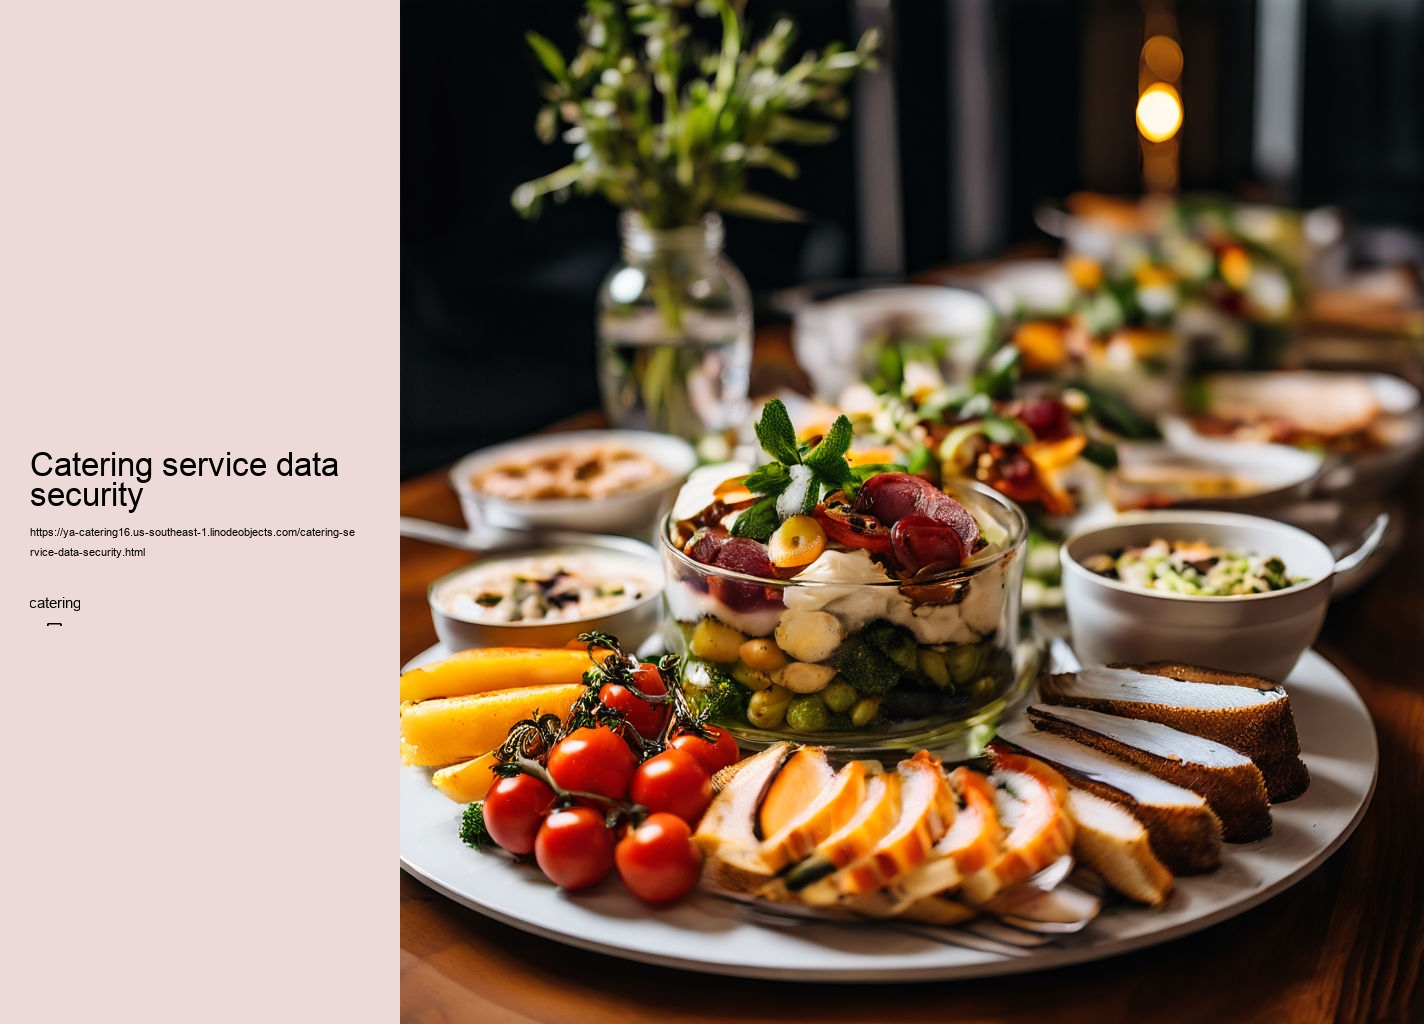 Catering service data security